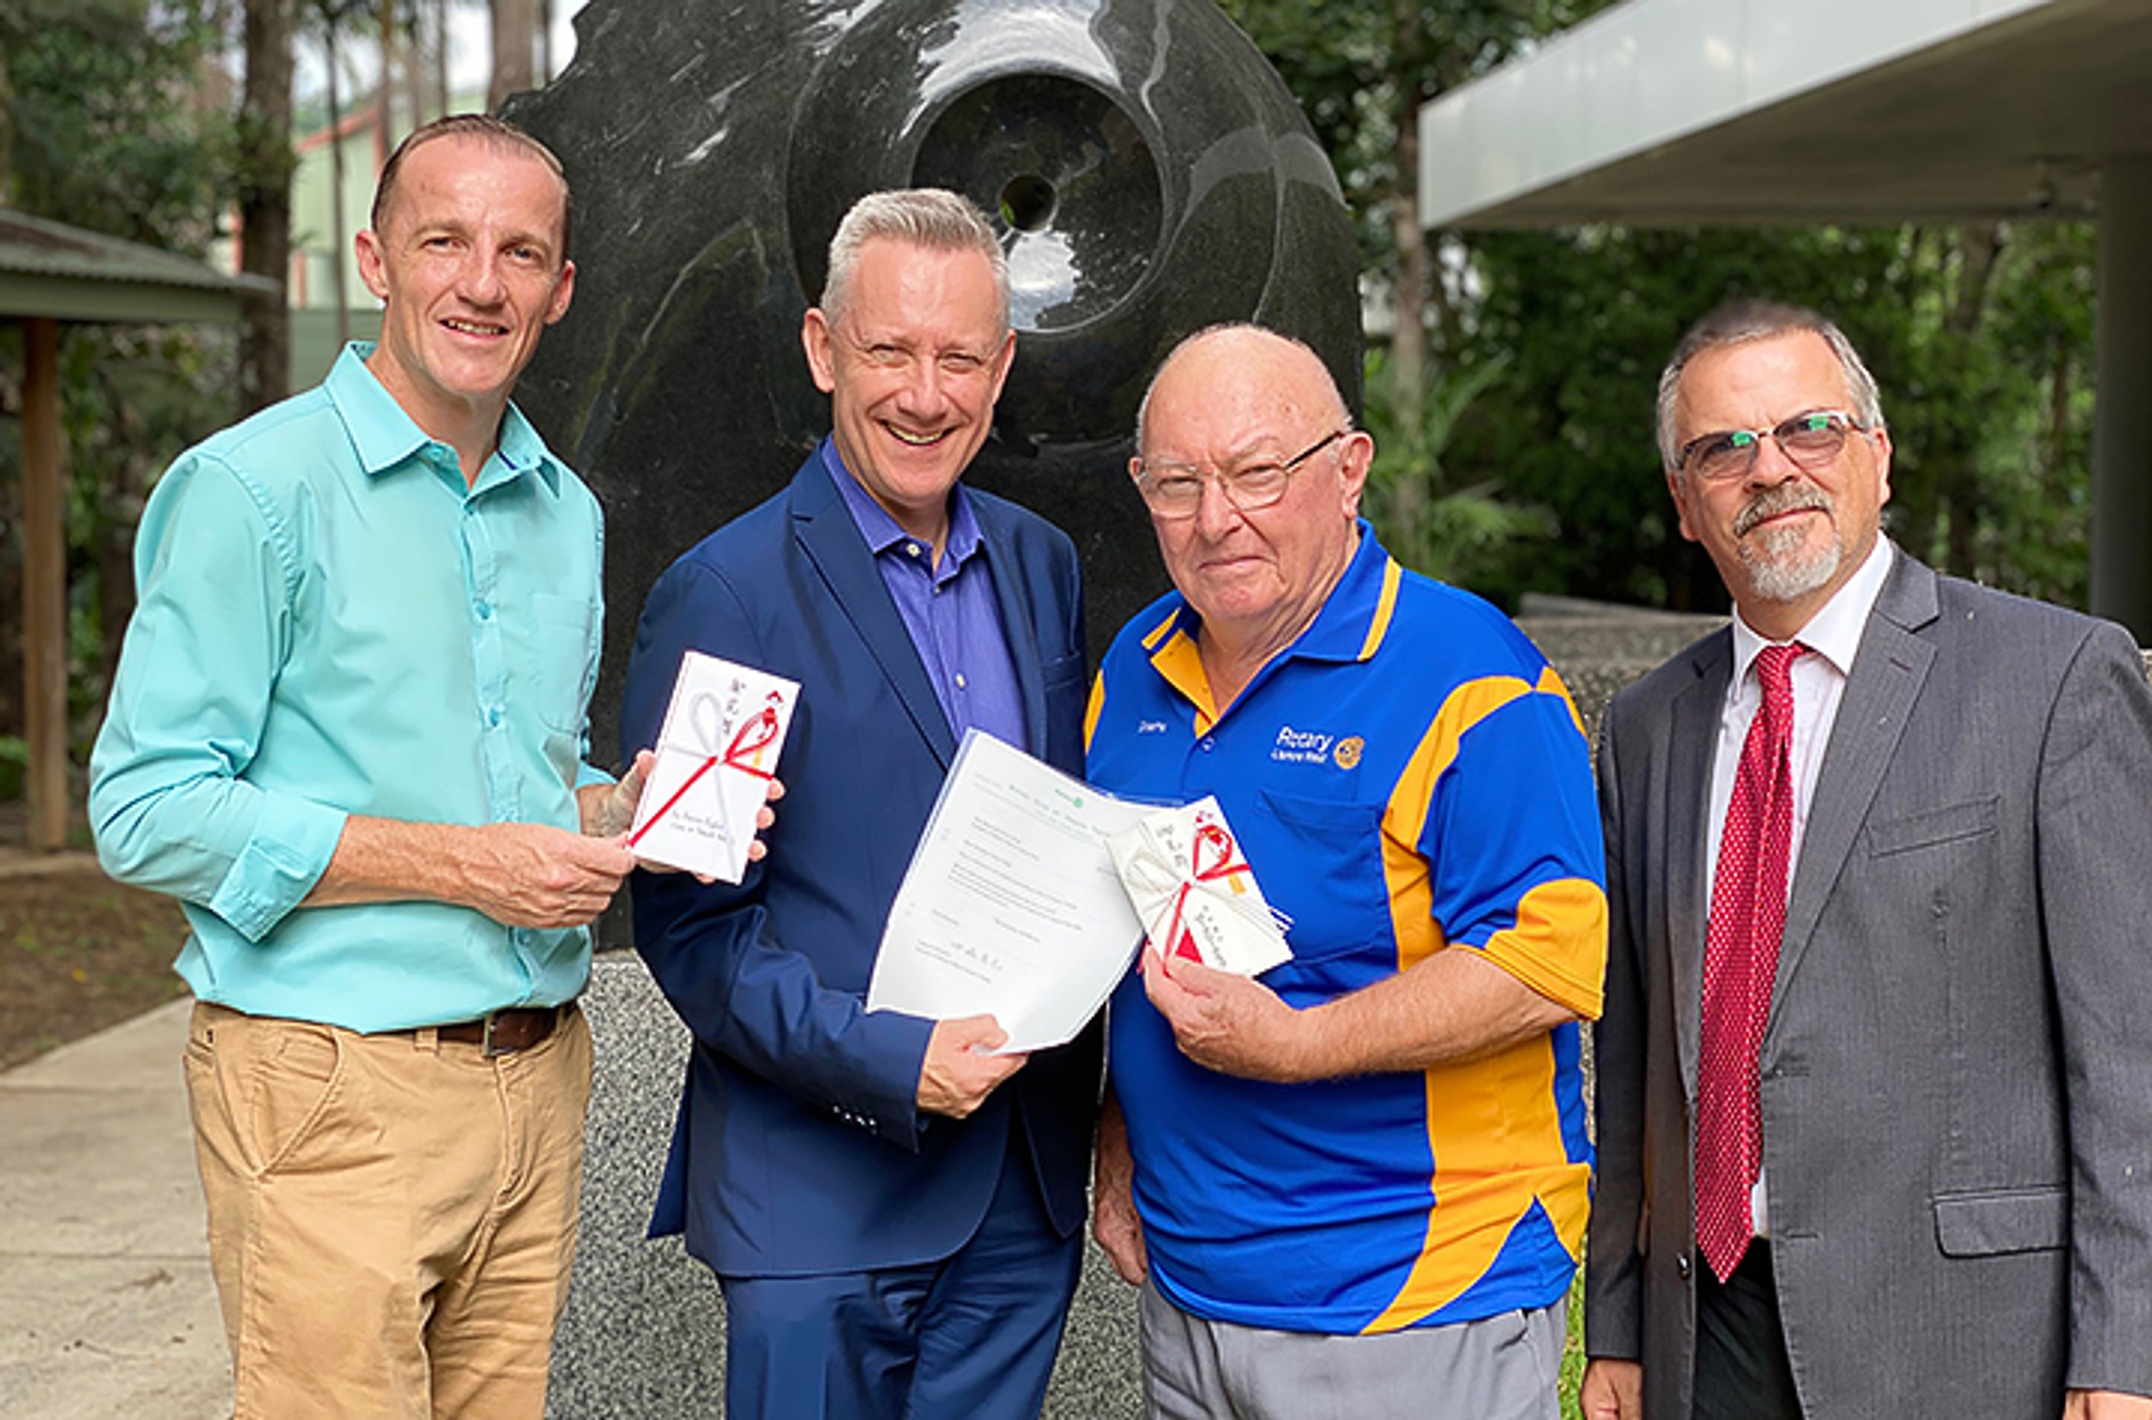 Lismore Mayor Isaac Smith, Vice Chancellor Professor Adam Shoemaker, Lismore West Rotary Secretary Graeme Hargreaves and Professor Peter Wilson accepting donations from the people of Yamato Takada to Lismore for bushfire relief.